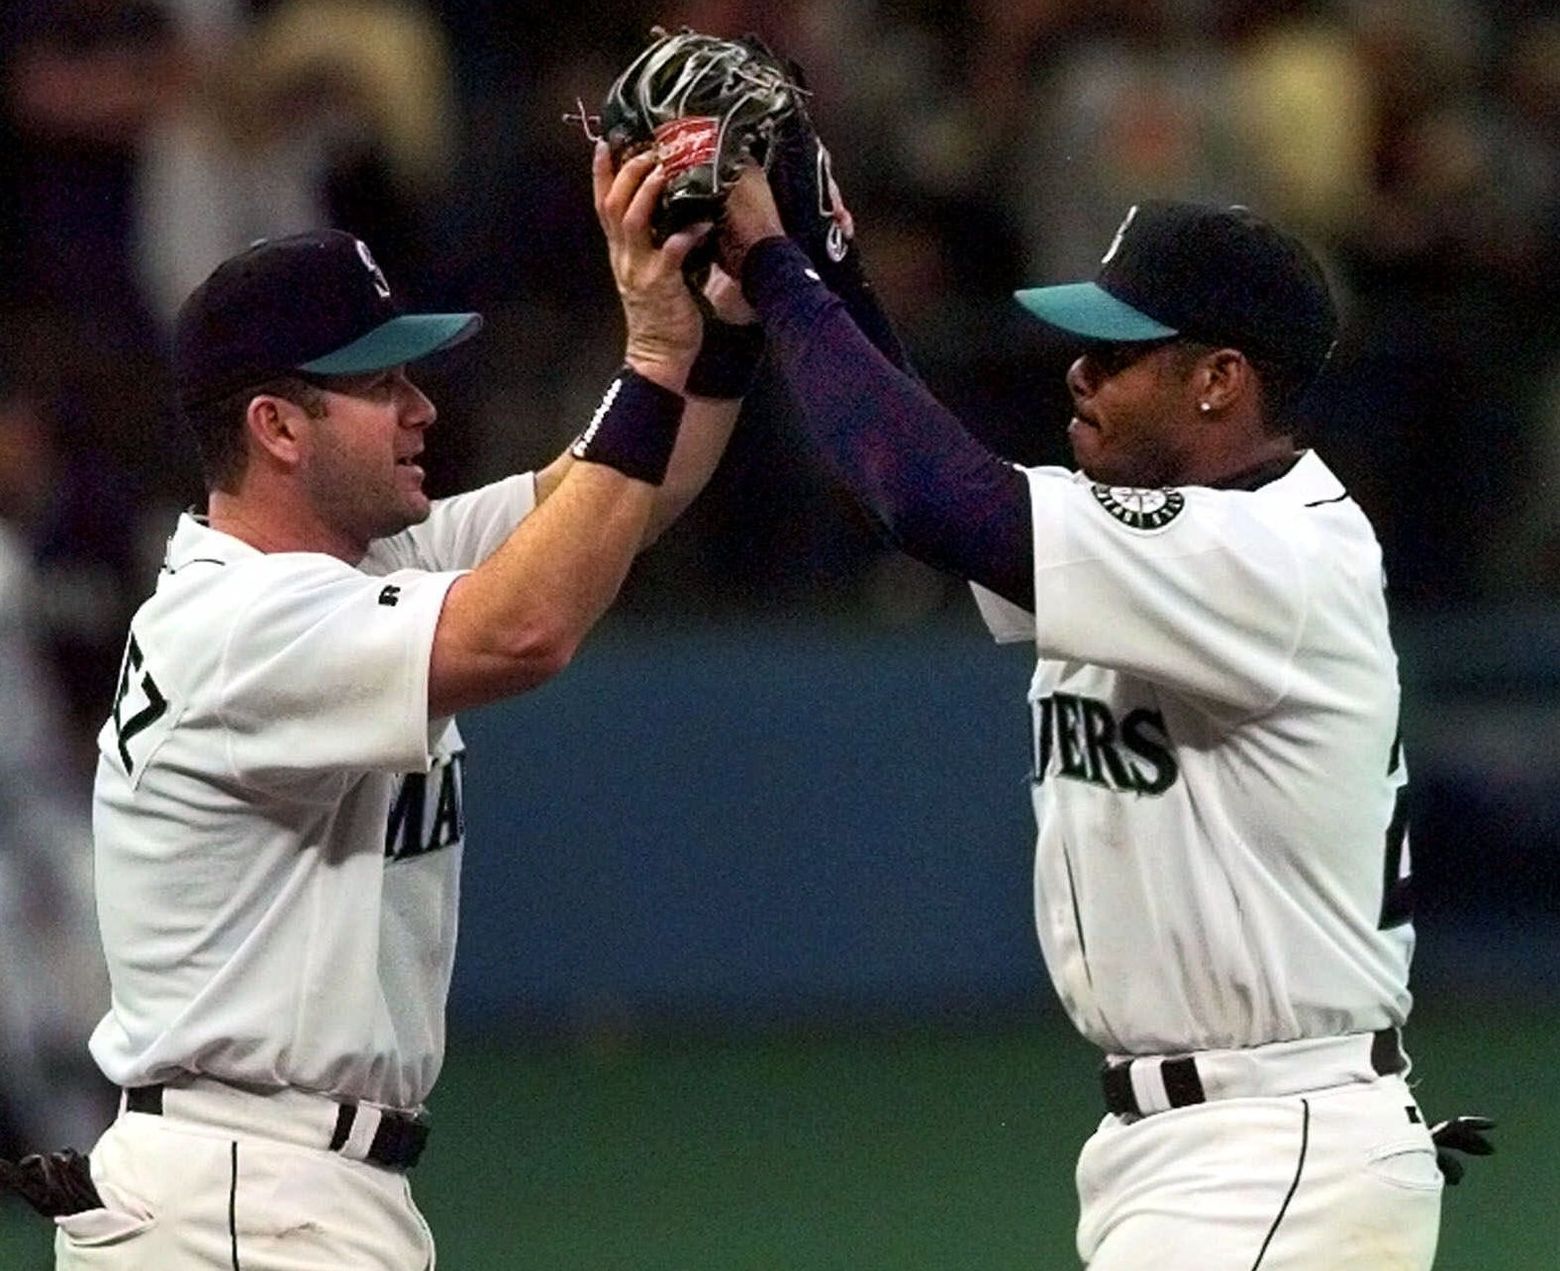 Ken Griffey Jr. won't be a unanimous selection for the Hall of